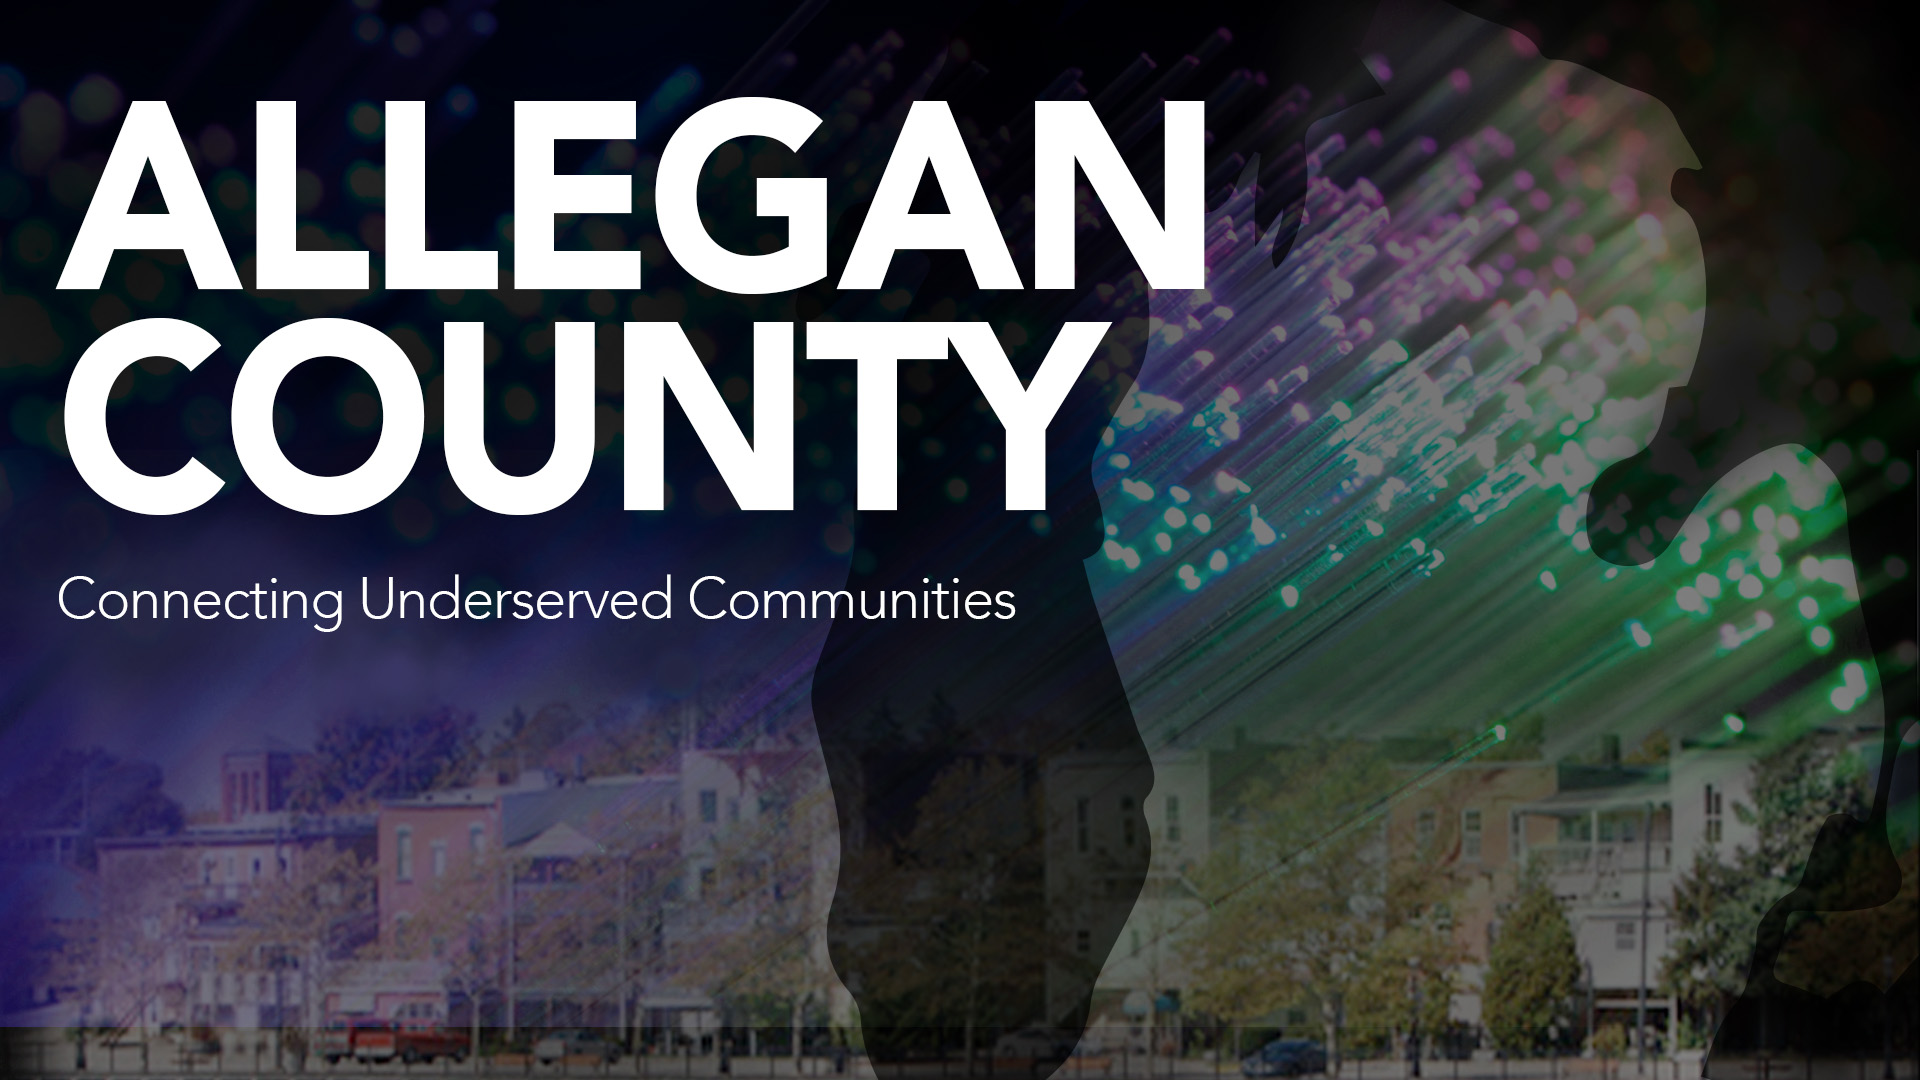 Allegan County Selects 123NET to Provide Fiber Internet to 12,000 Underserved Homes